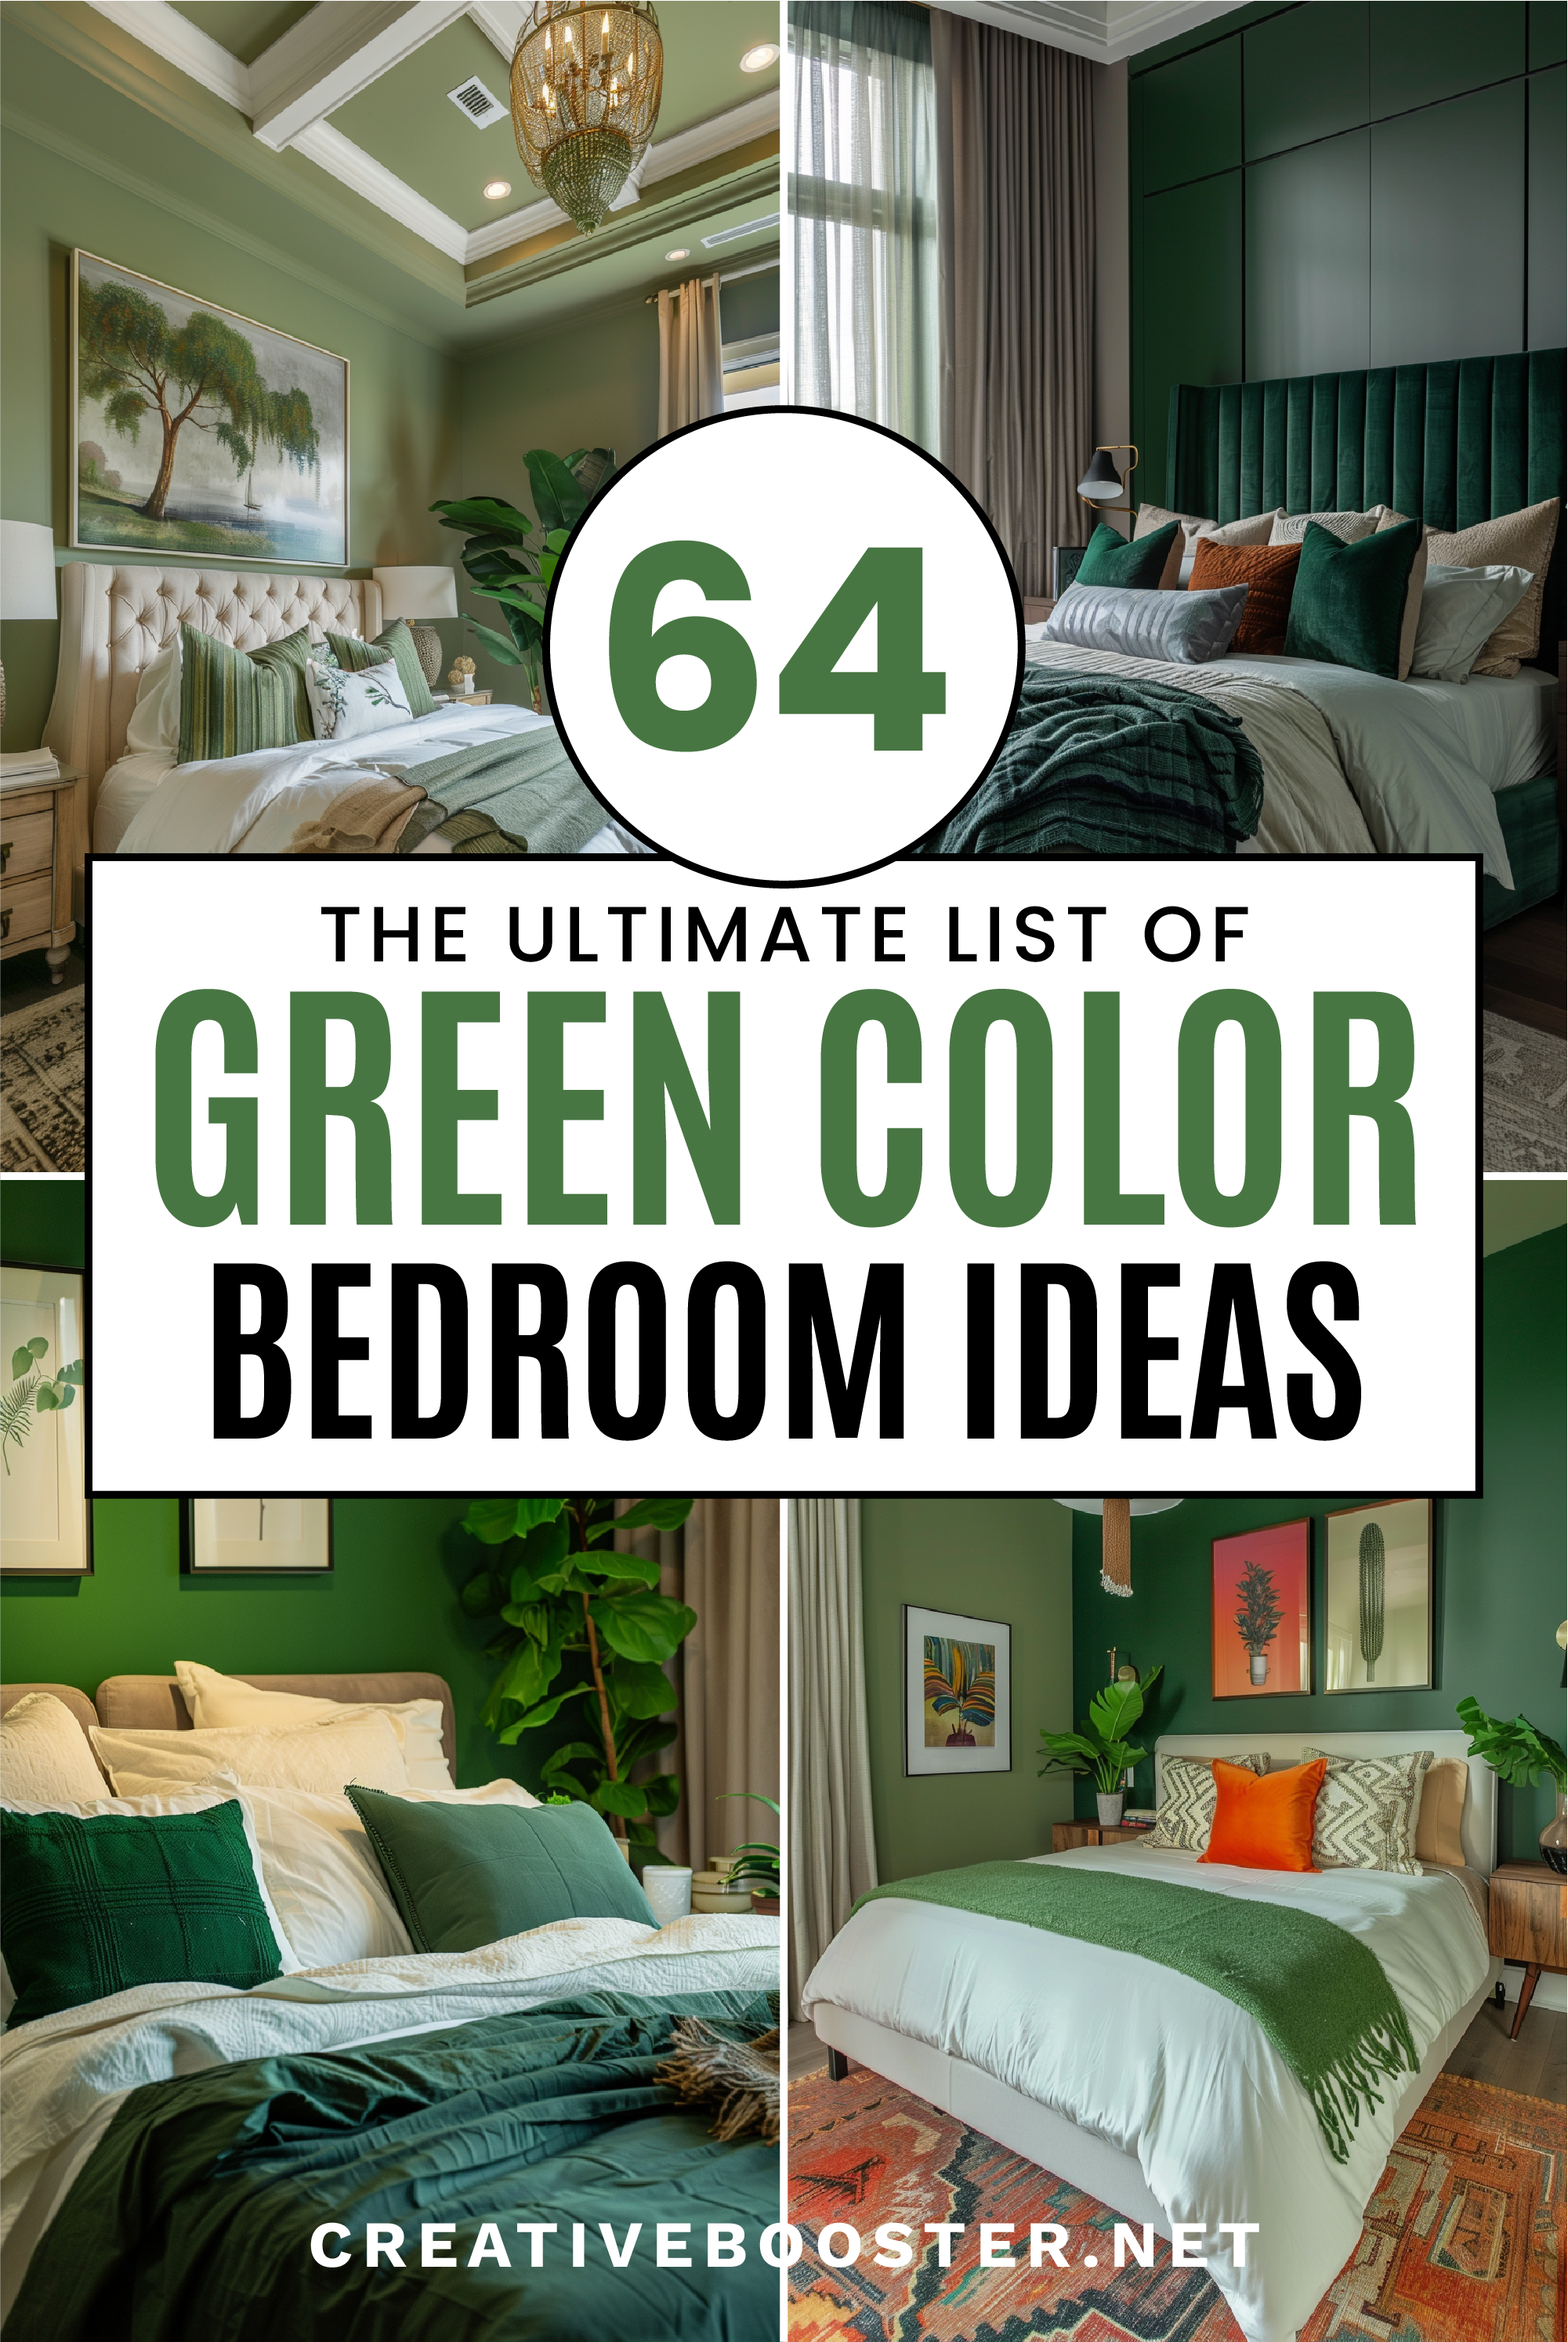 Green-Bedroom-Ideas-(Home-Decoration-and-Wall-Paint-Design-Inspiration) Pinterest Tall 6